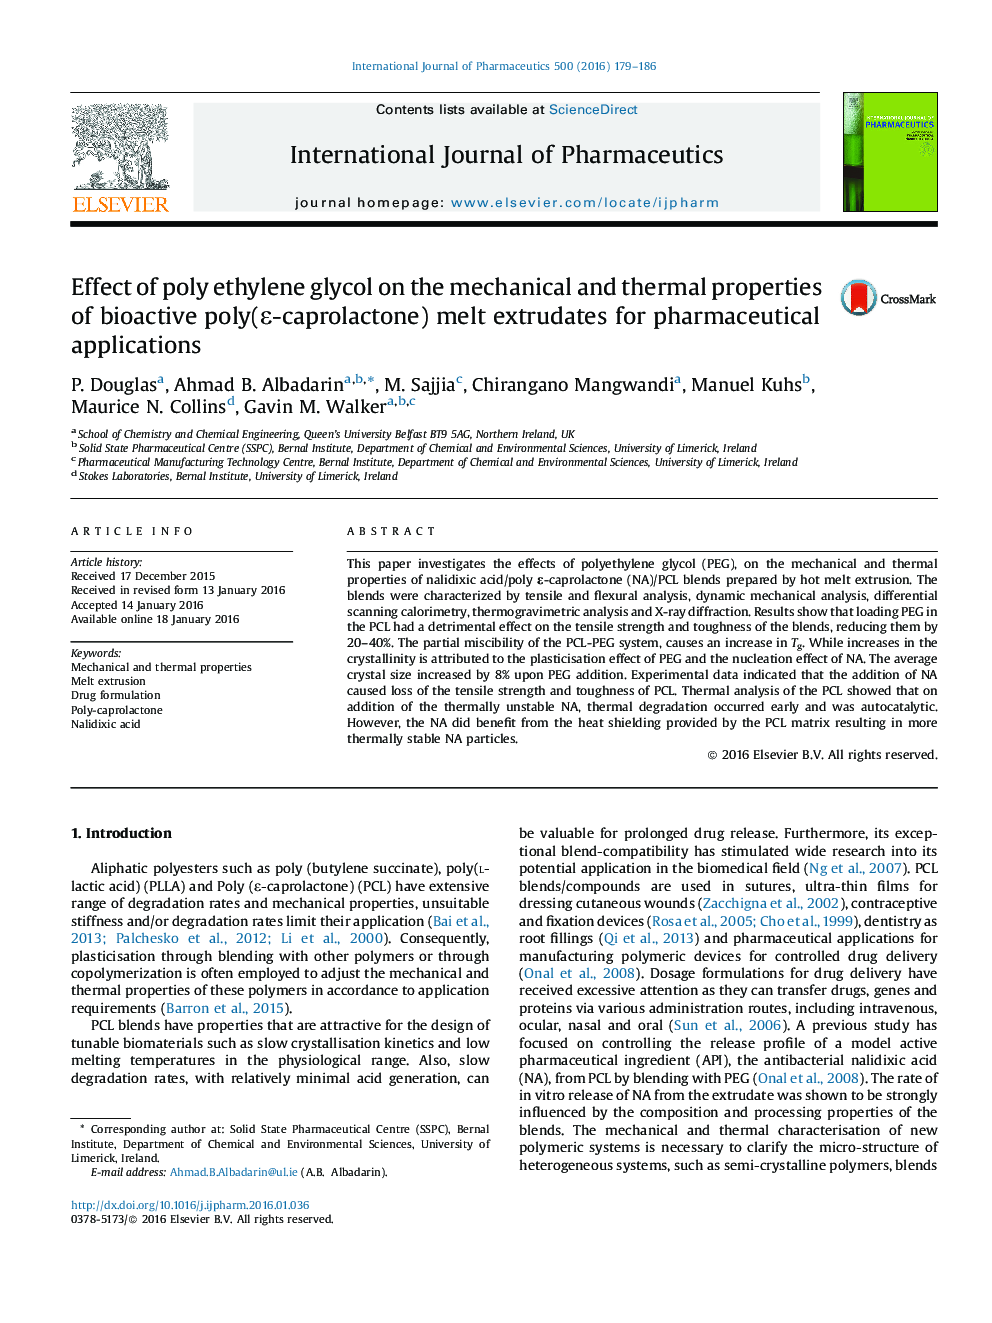 Effect of poly ethylene glycol on the mechanical and thermal properties of bioactive poly(Îµ-caprolactone) melt extrudates for pharmaceutical applications